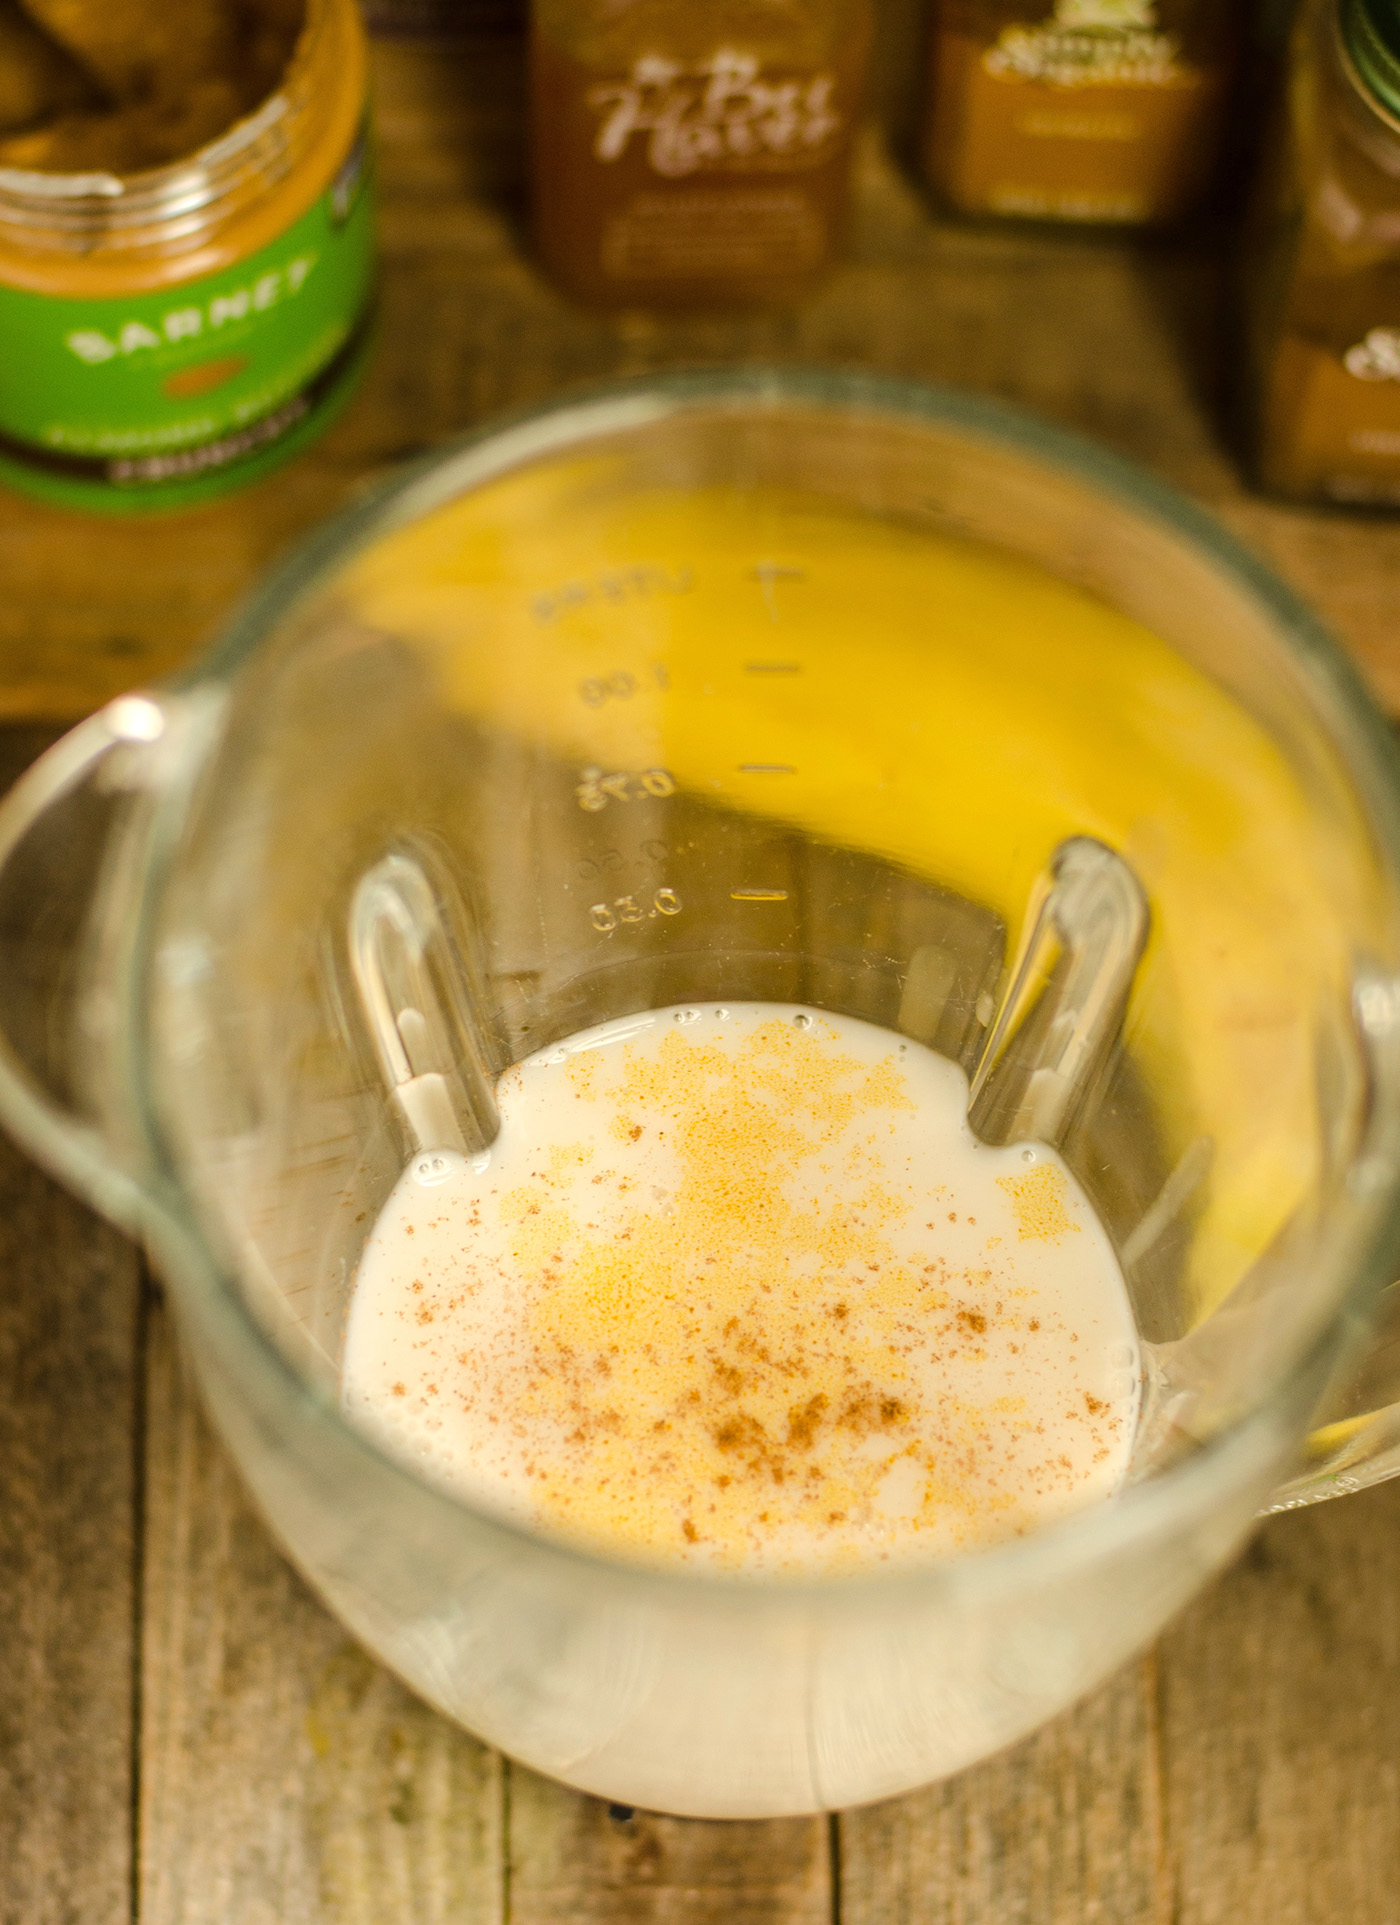 Almond milk and spices added to a blender